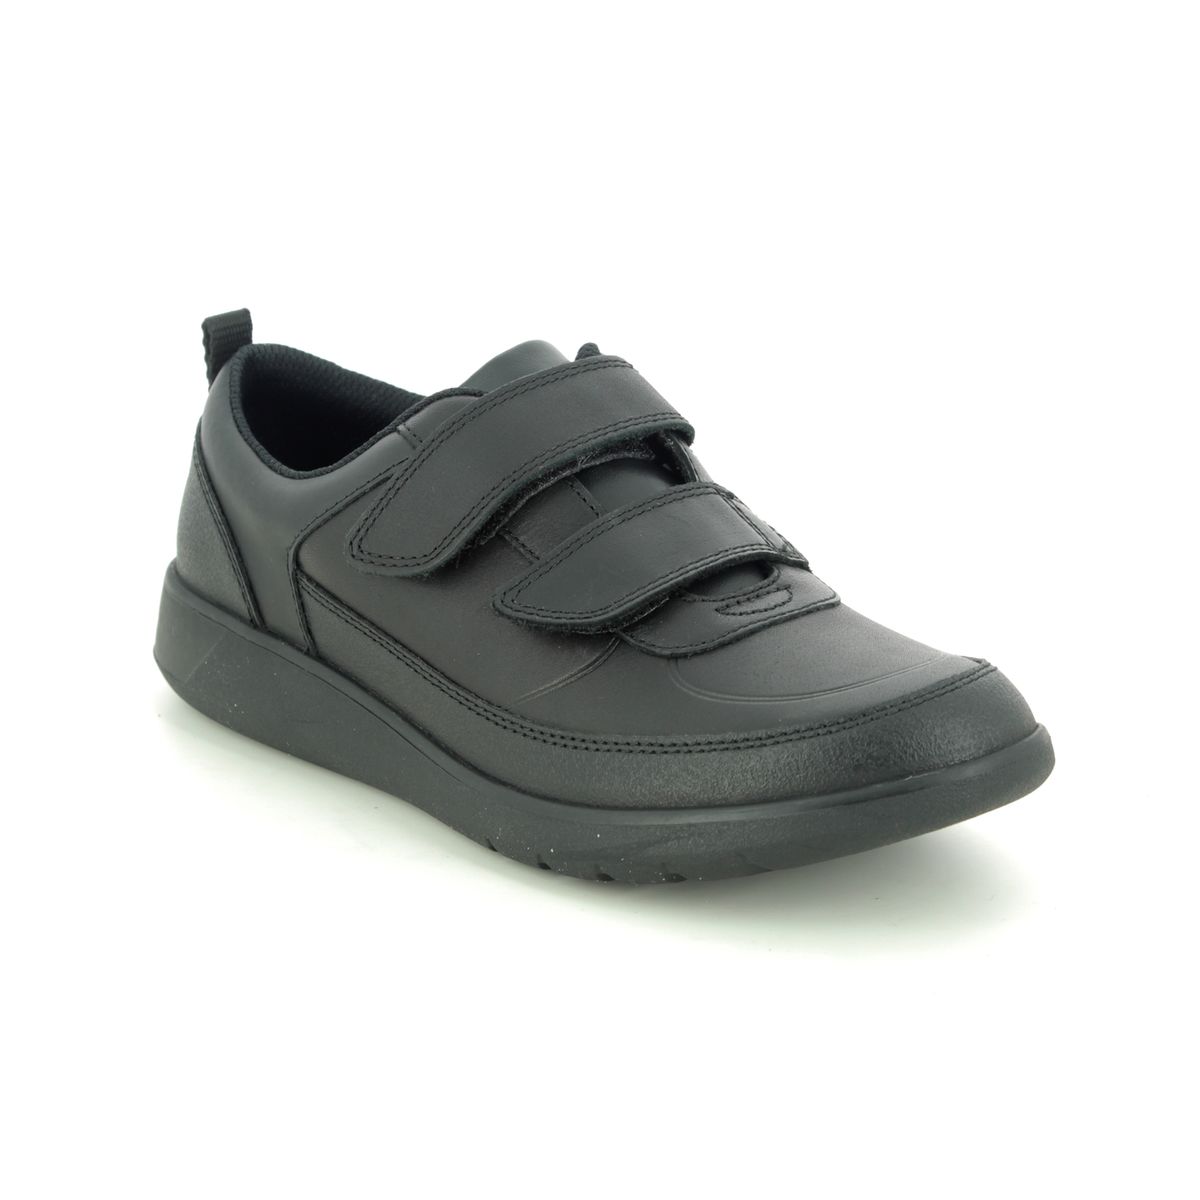 Clarks Scape Flare Y Black Leather Kids Boys Shoes 494098H In Size 5.5 In Plain Black Leather H Width Fitting Extra Wide For School For kids